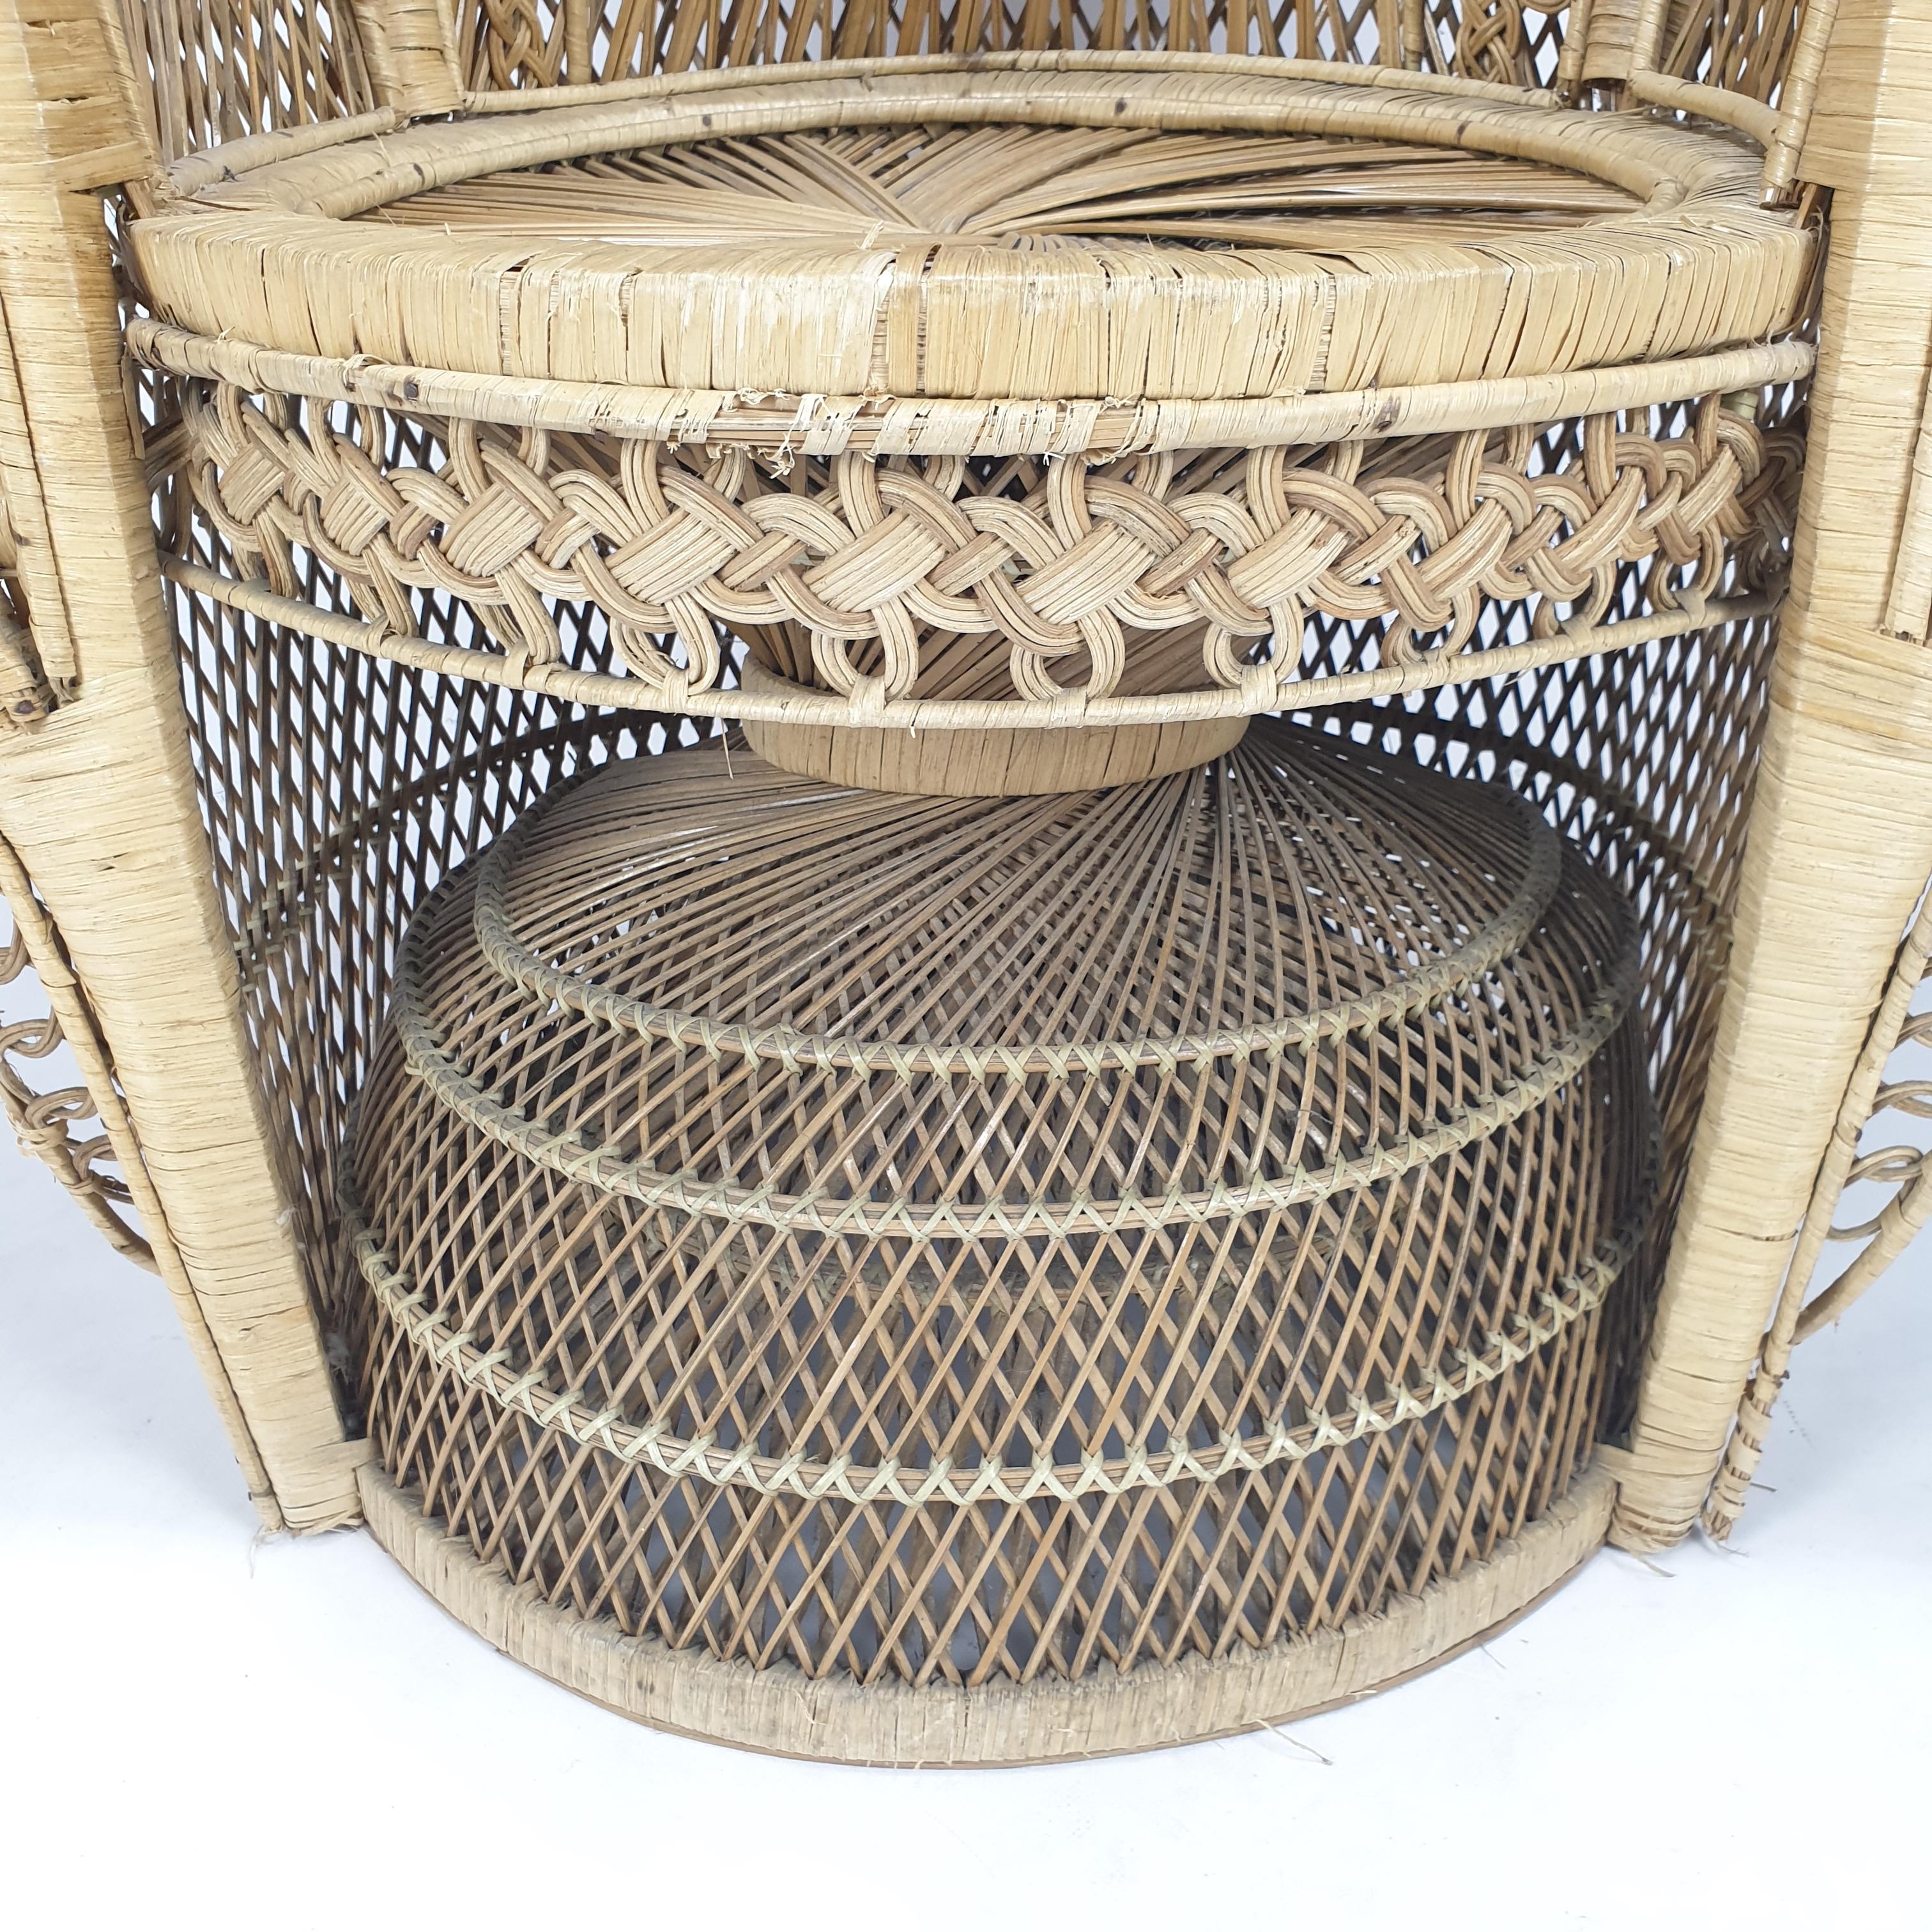 Midcentury Emmanuelle or Peacock Rattan and Wicker Chair, Italy 1960s For Sale 7